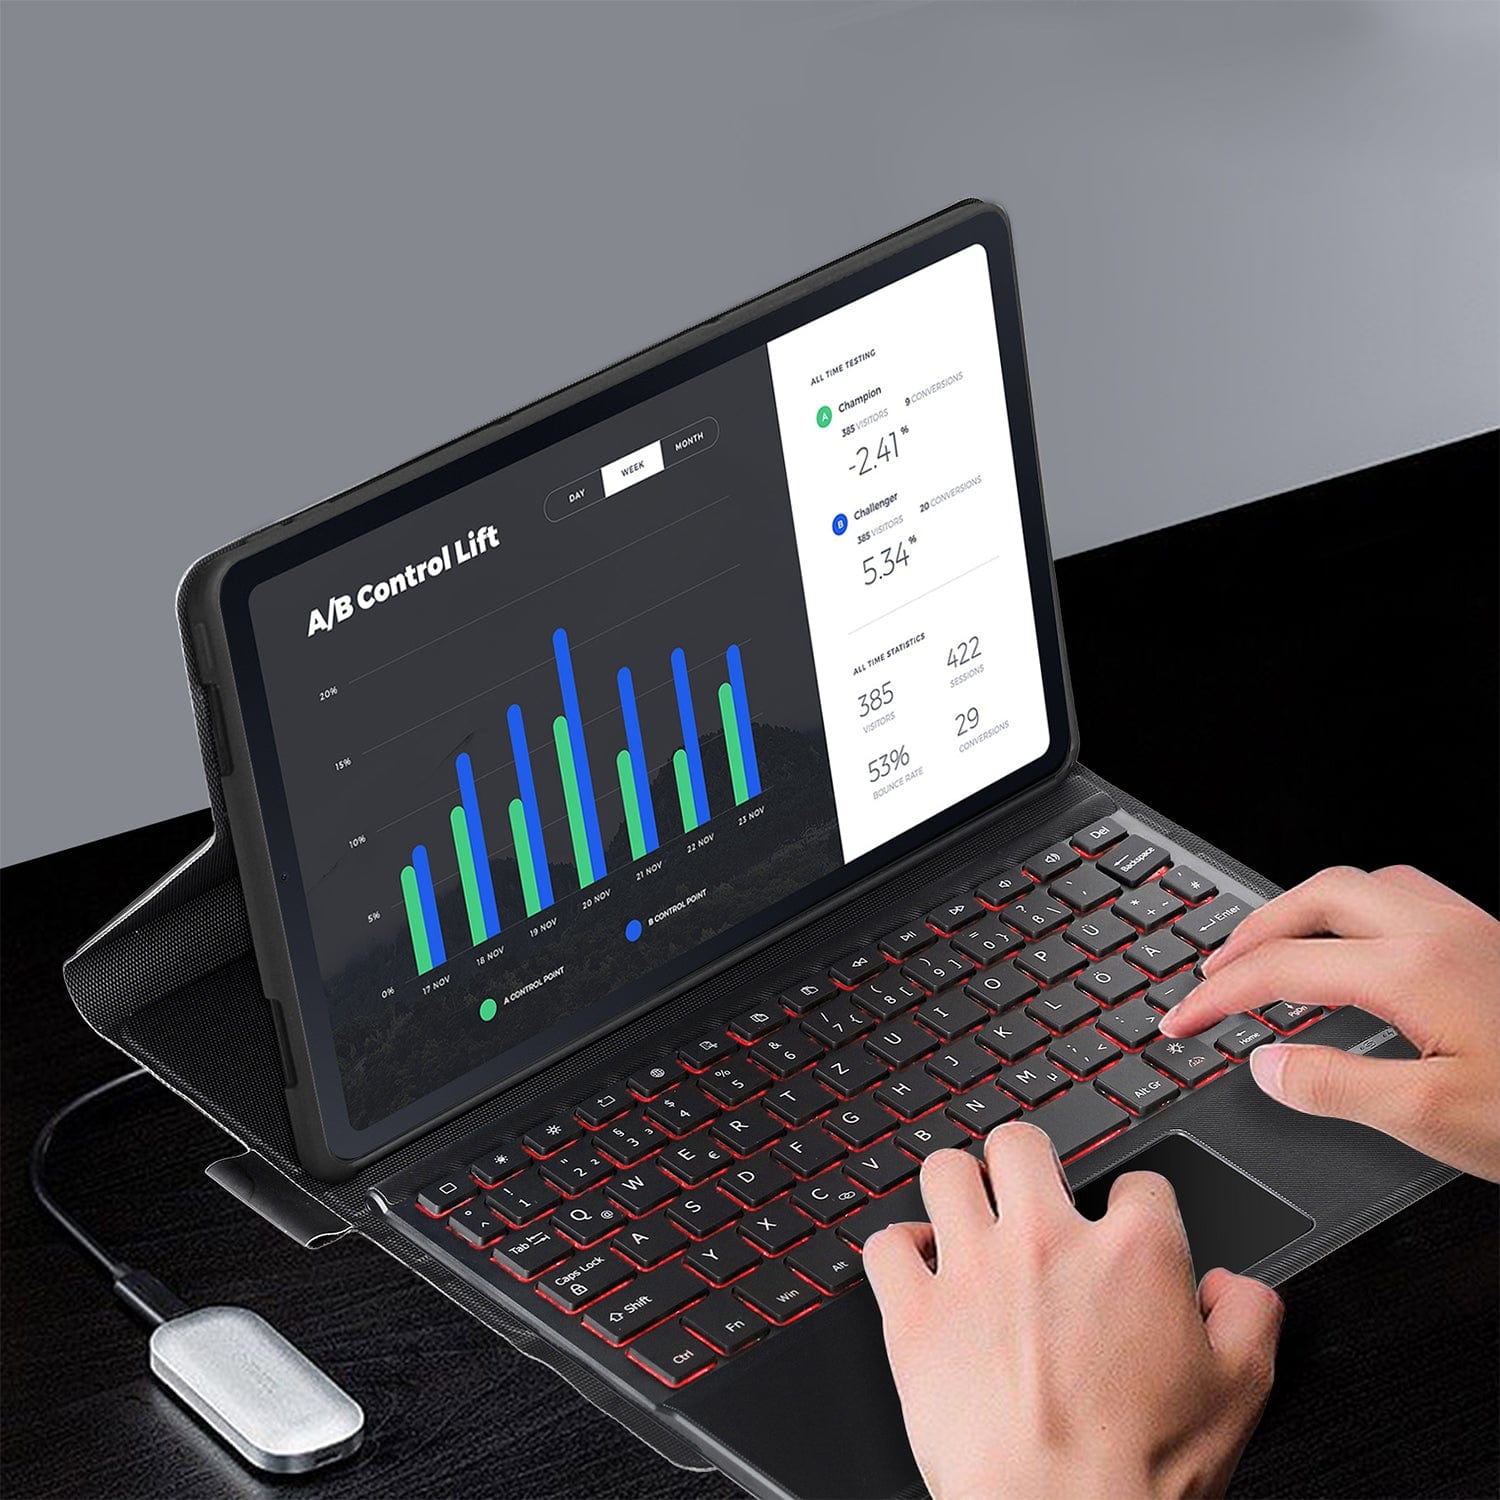 Keyboard Case with Mouse Pad for Lenovo Tab P11 (2nd Generation) - Black